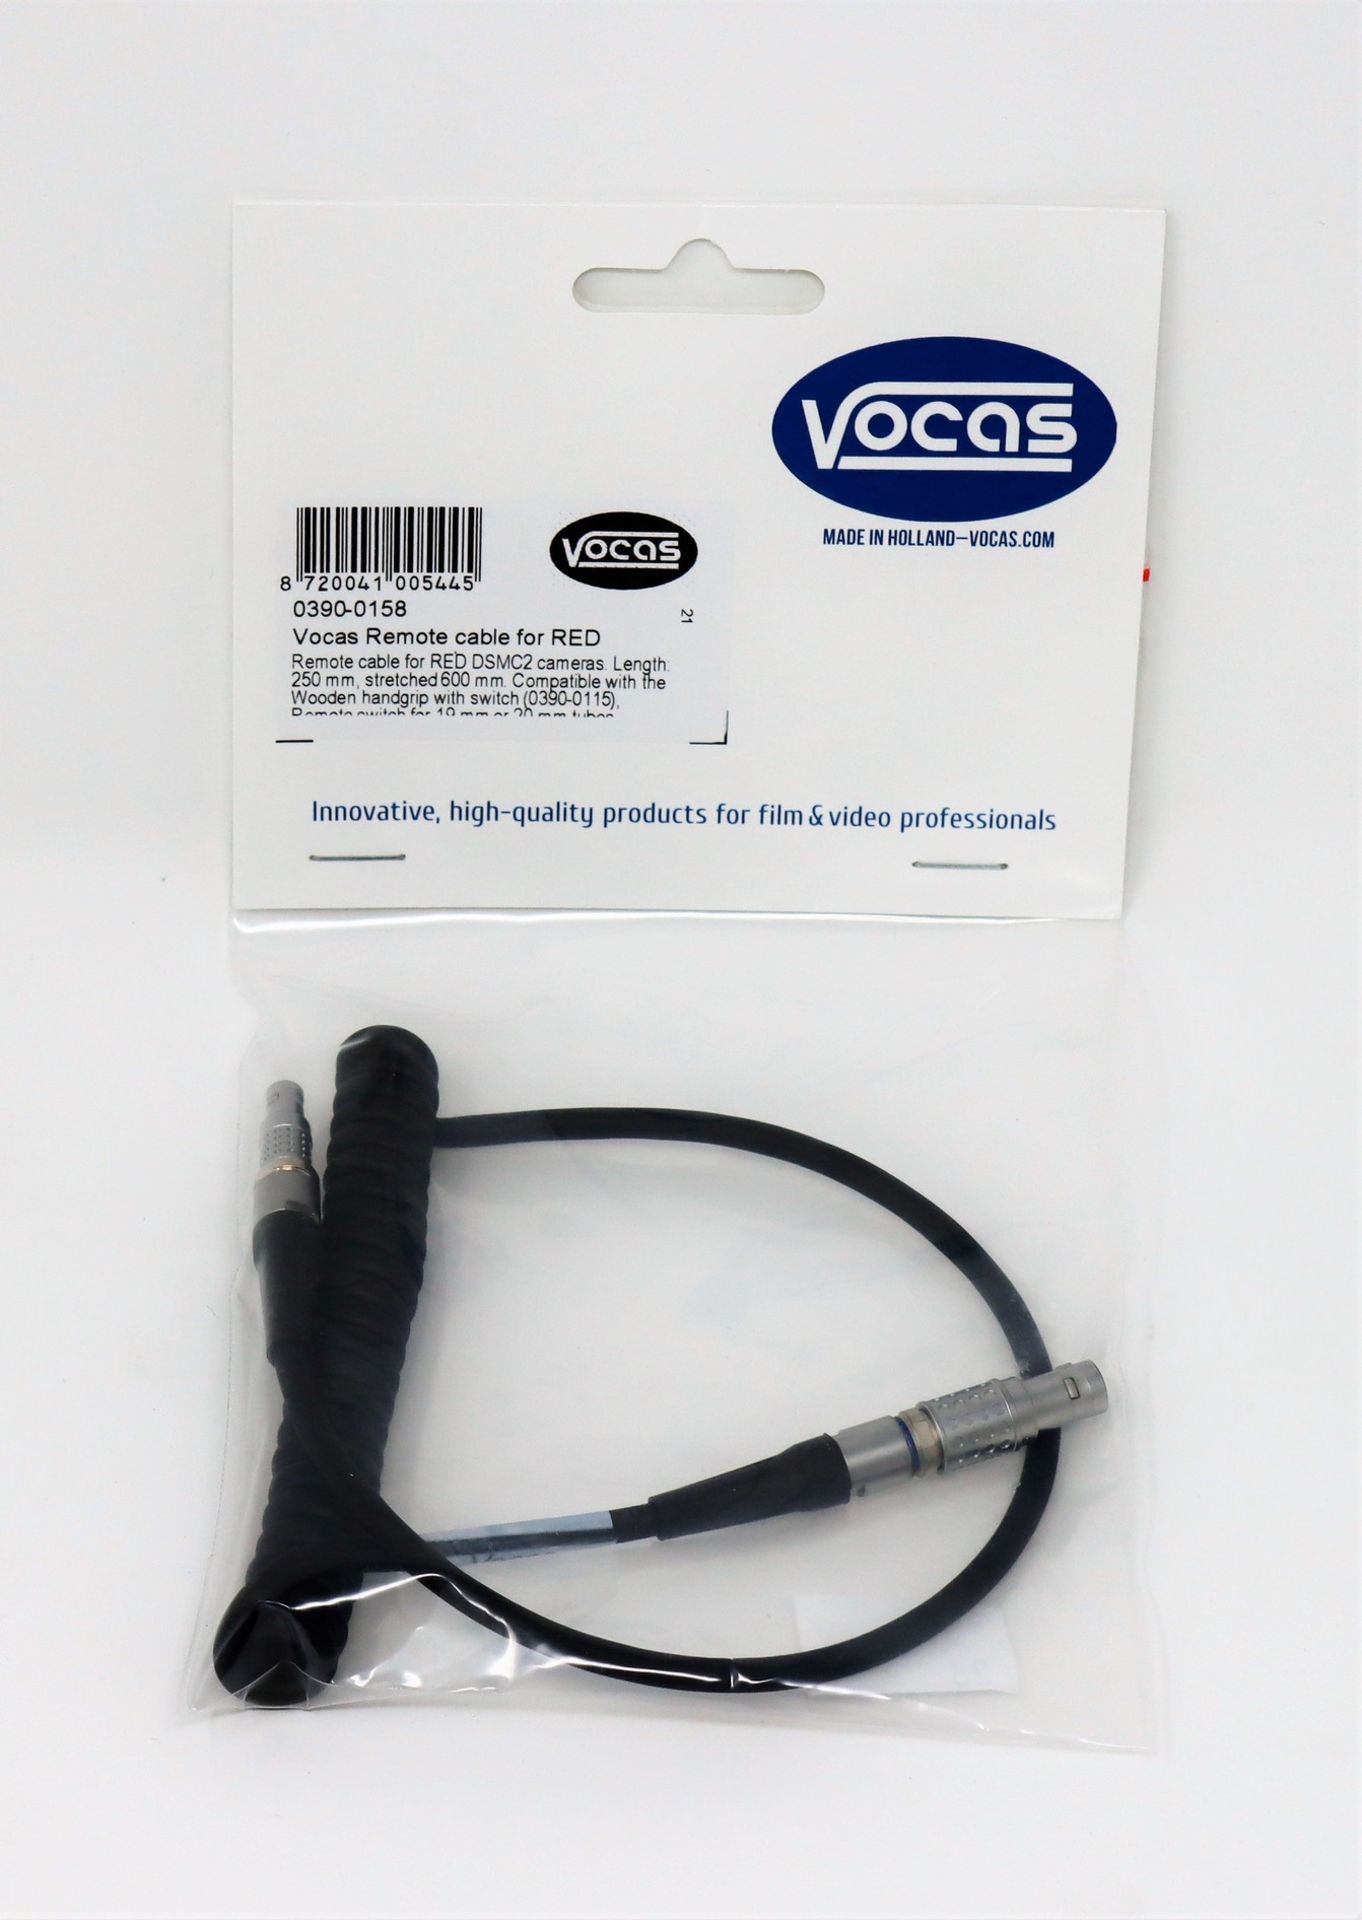 Two as new Vocas Remote Cables for RED DSMC2 Cameras (Length: 250 mm, stretched 600 mm) (P/N: 0390-